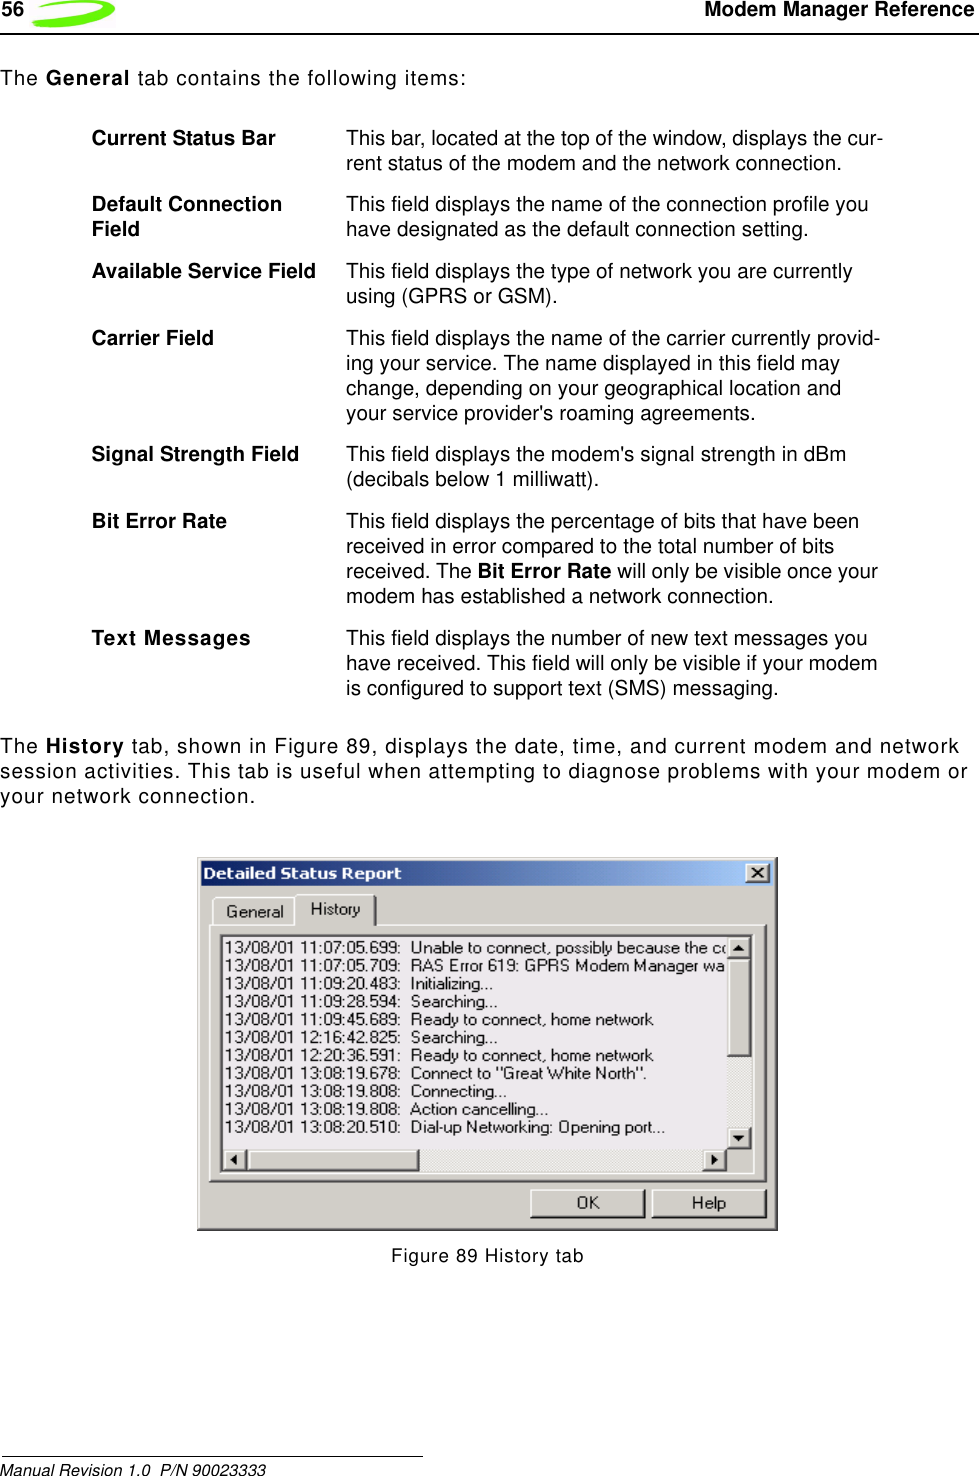 56  Modem Manager ReferenceManual Revision 1.0  P/N 90023333 The General tab contains the following items:The History tab, shown in Figure 89, displays the date, time, and current modem and network session activities. This tab is useful when attempting to diagnose problems with your modem or your network connection.Figure 89 History tabCurrent Status Bar This bar, located at the top of the window, displays the cur-rent status of the modem and the network connection.Default Connection Field This field displays the name of the connection profile you have designated as the default connection setting.Available Service Field This field displays the type of network you are currently using (GPRS or GSM). Carrier Field This field displays the name of the carrier currently provid-ing your service. The name displayed in this field may change, depending on your geographical location and your service provider&apos;s roaming agreements.Signal Strength Field This field displays the modem&apos;s signal strength in dBm (decibals below 1 milliwatt).Bit Error Rate This field displays the percentage of bits that have been received in error compared to the total number of bits received. The Bit Error Rate will only be visible once your modem has established a network connection.Text Messages This field displays the number of new text messages you have received. This field will only be visible if your modem is configured to support text (SMS) messaging. 